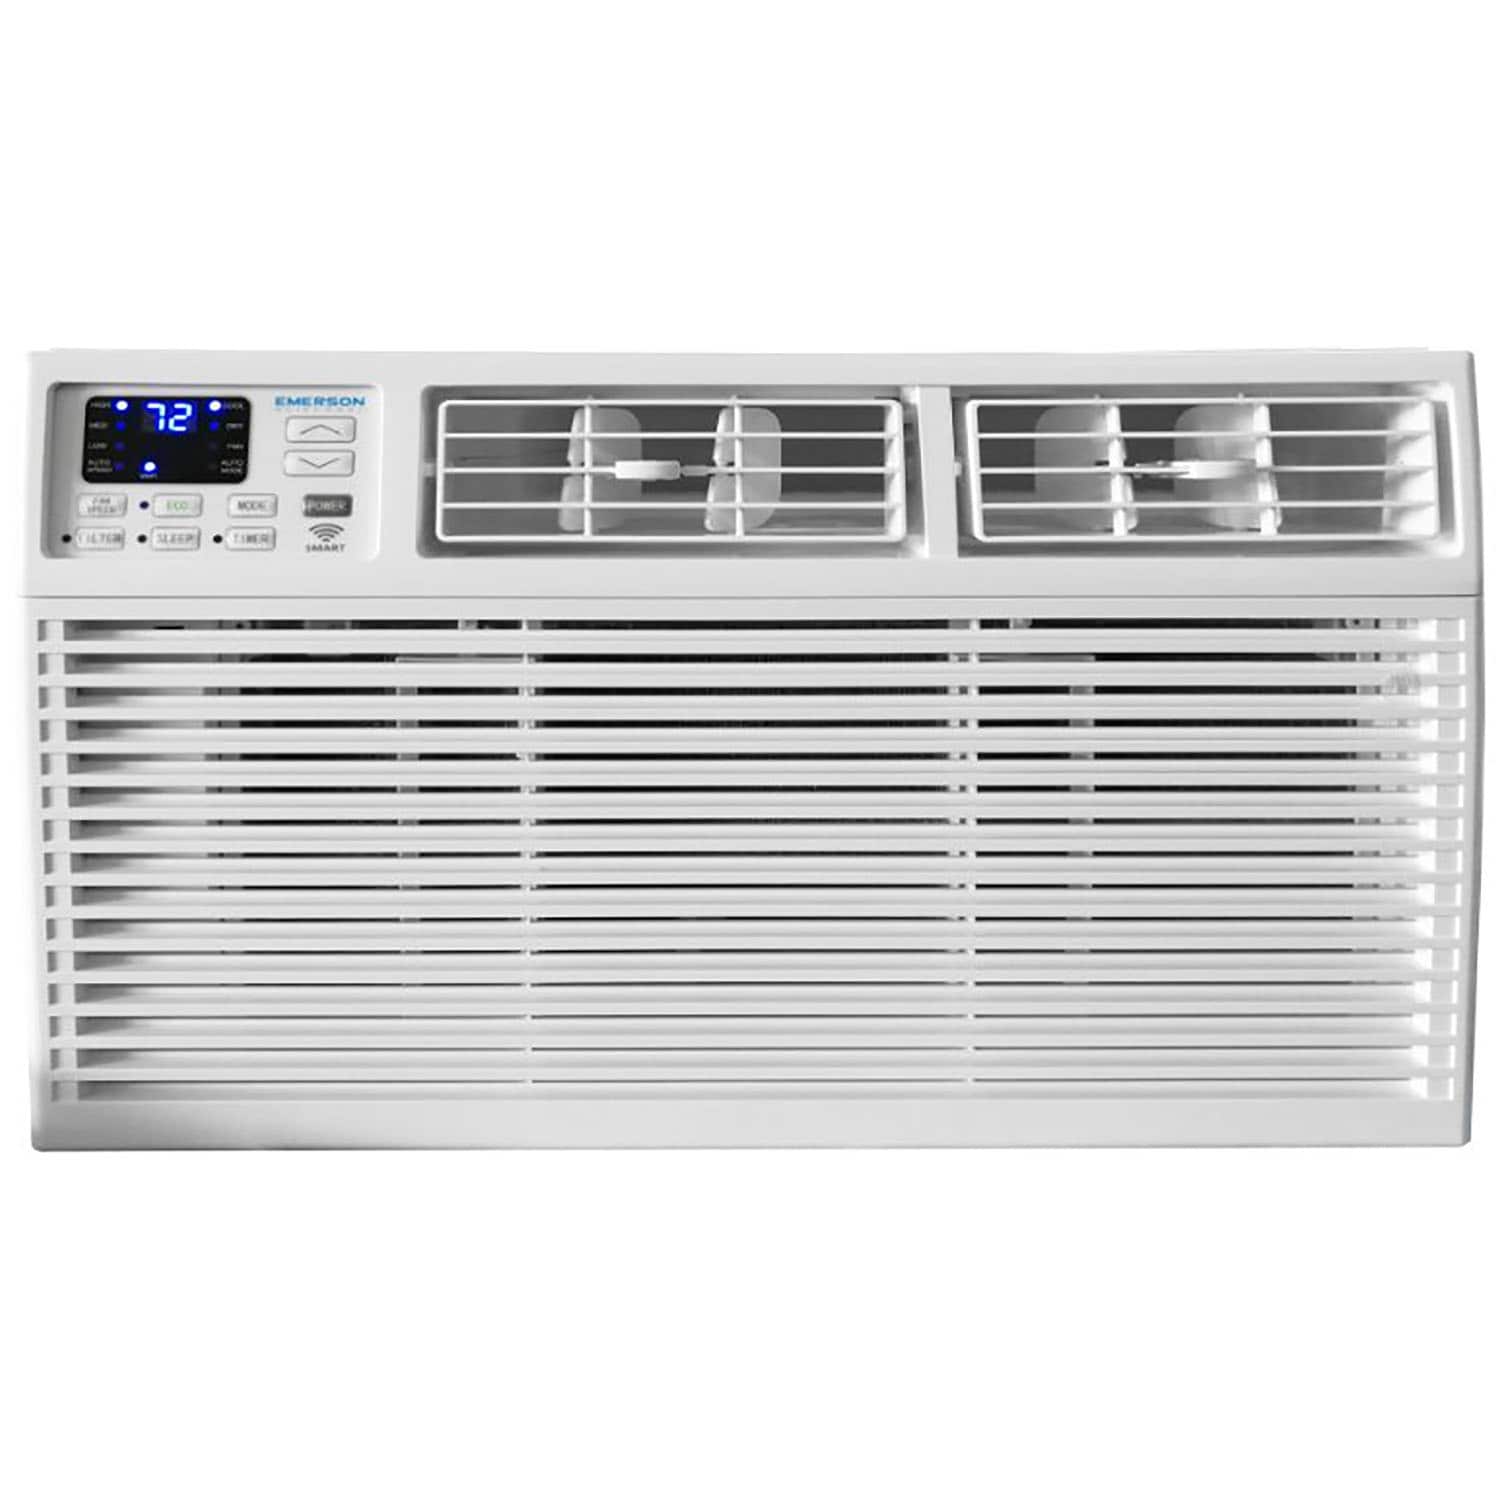 Kool 8,000 BTU 115V SMART Window Air Conditioner with Remote, Wi-Fi, and Voice Control Energy Star Cools Rooms up to 350 Sq.Ft.